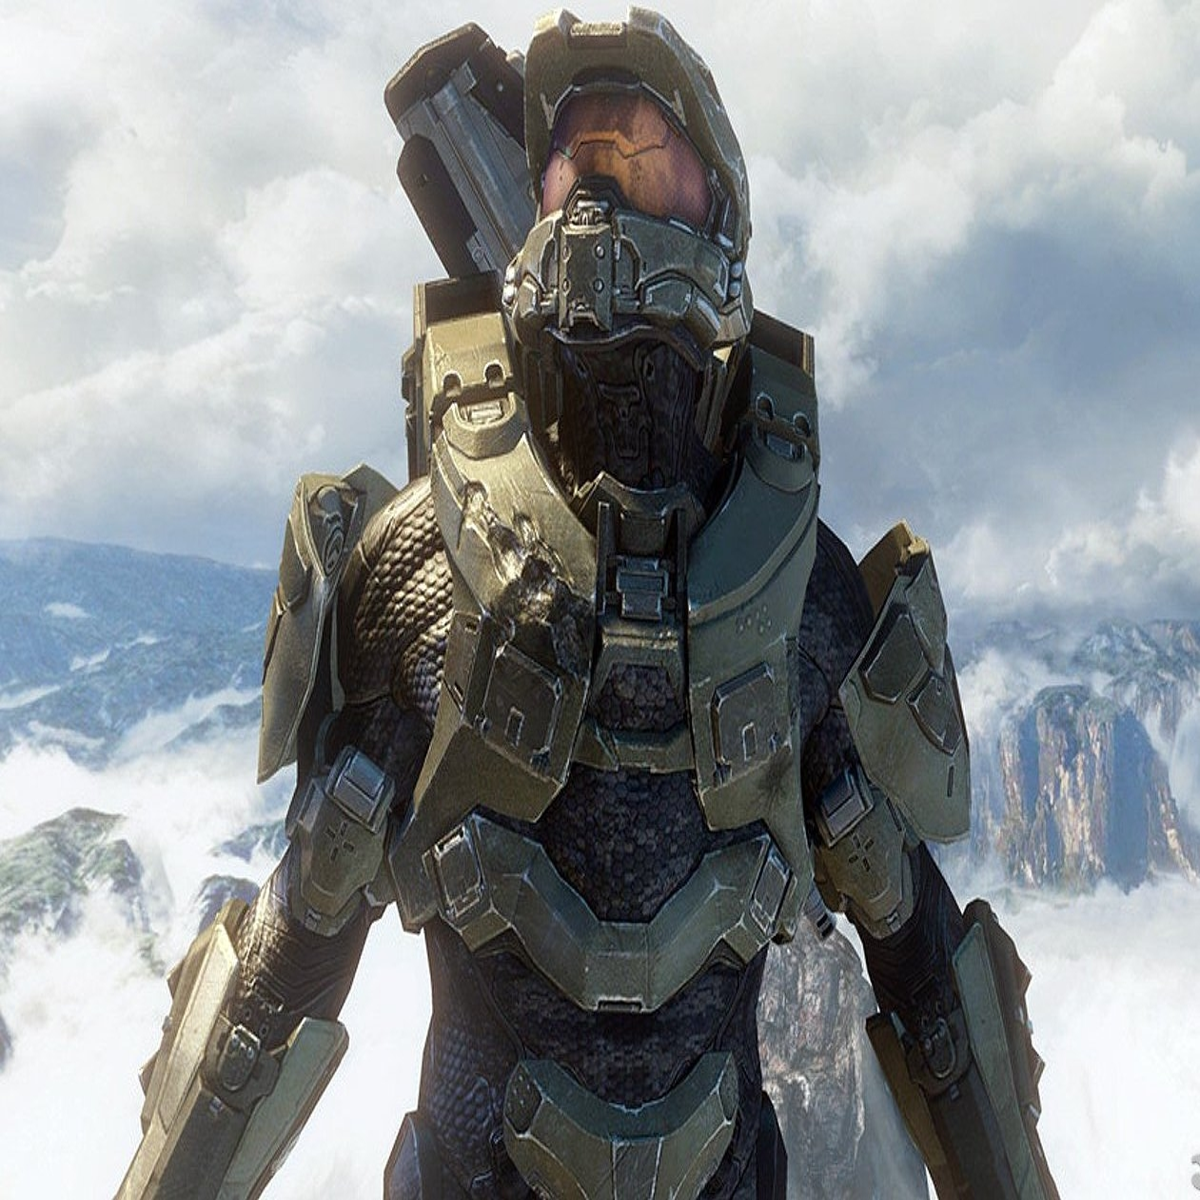 TRAILER: Master Chief's Past Will Be Revealed in 'Halo' - Knight